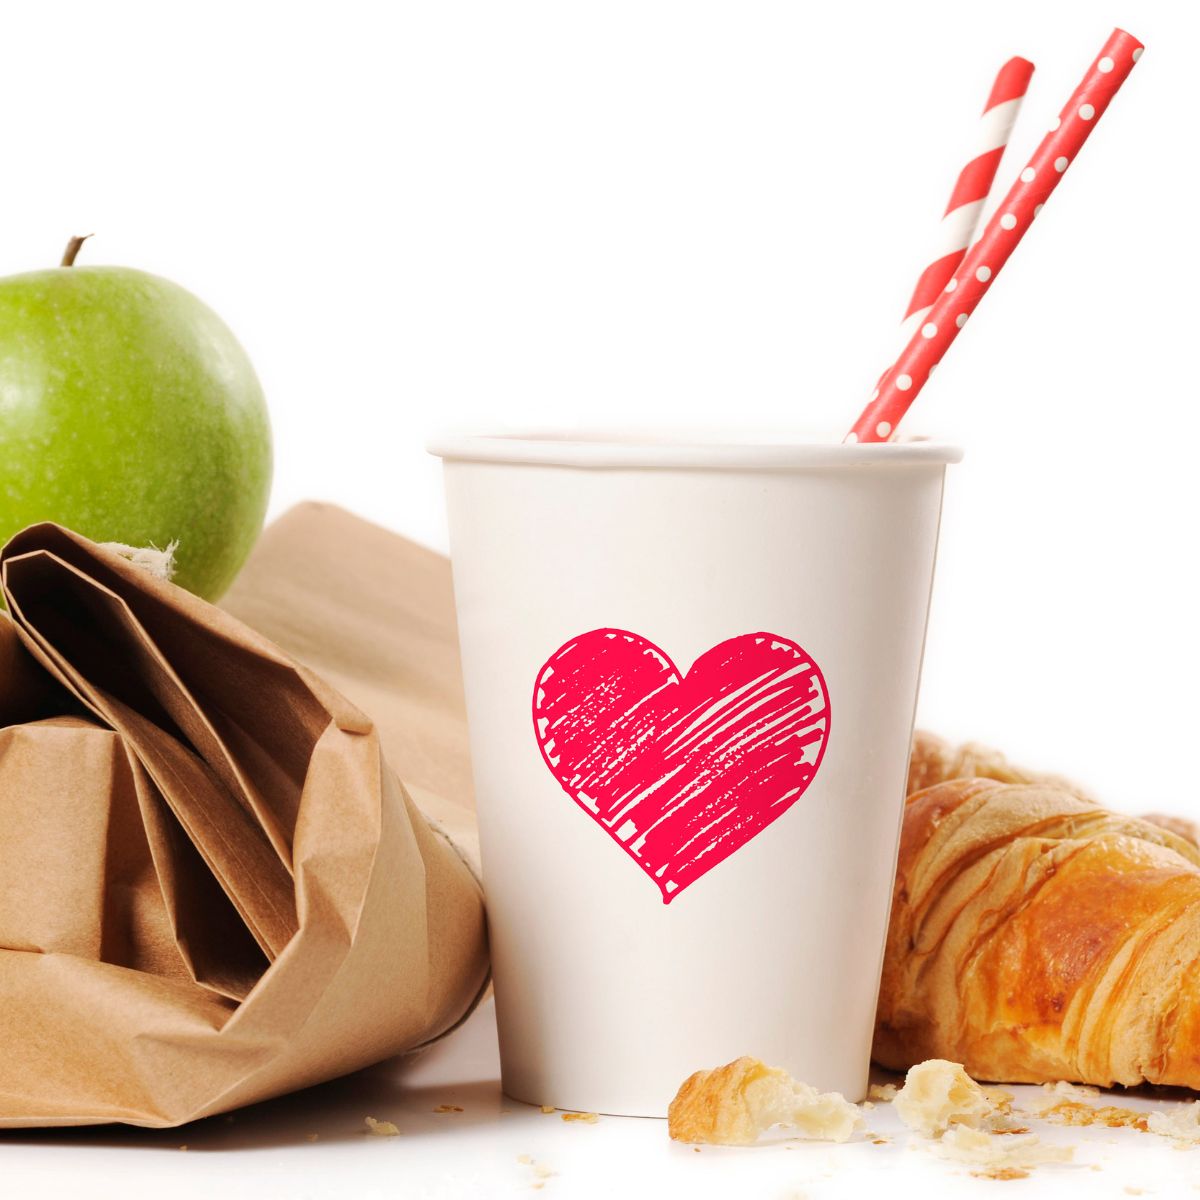 Brown bag lunch with a green apple, croissant and white paper cup with a red heart drawn on it.